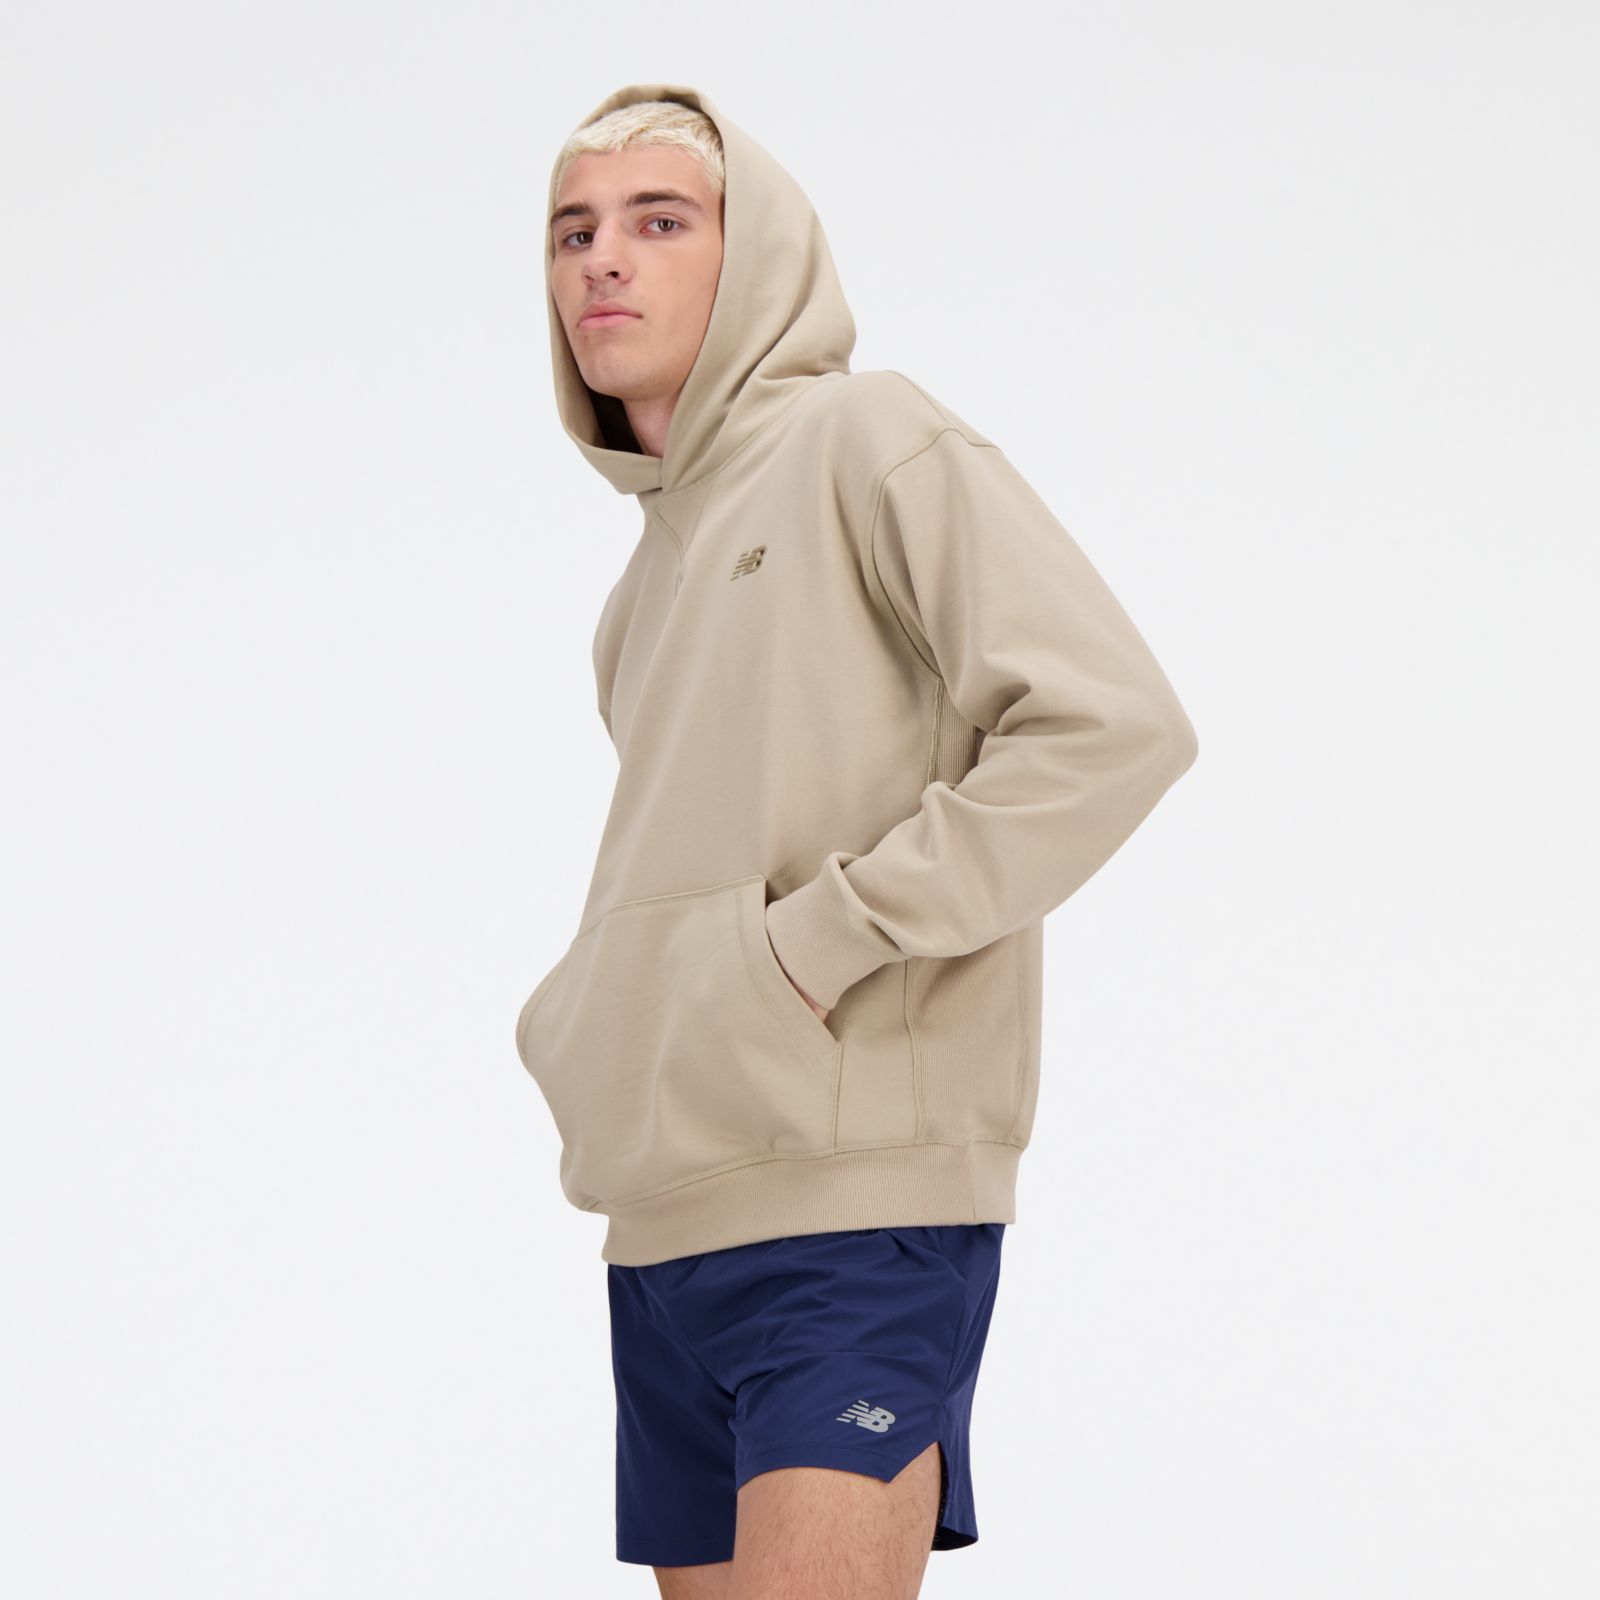 FUNDAMENTALS, Fitted S/S Hoodie, Cream